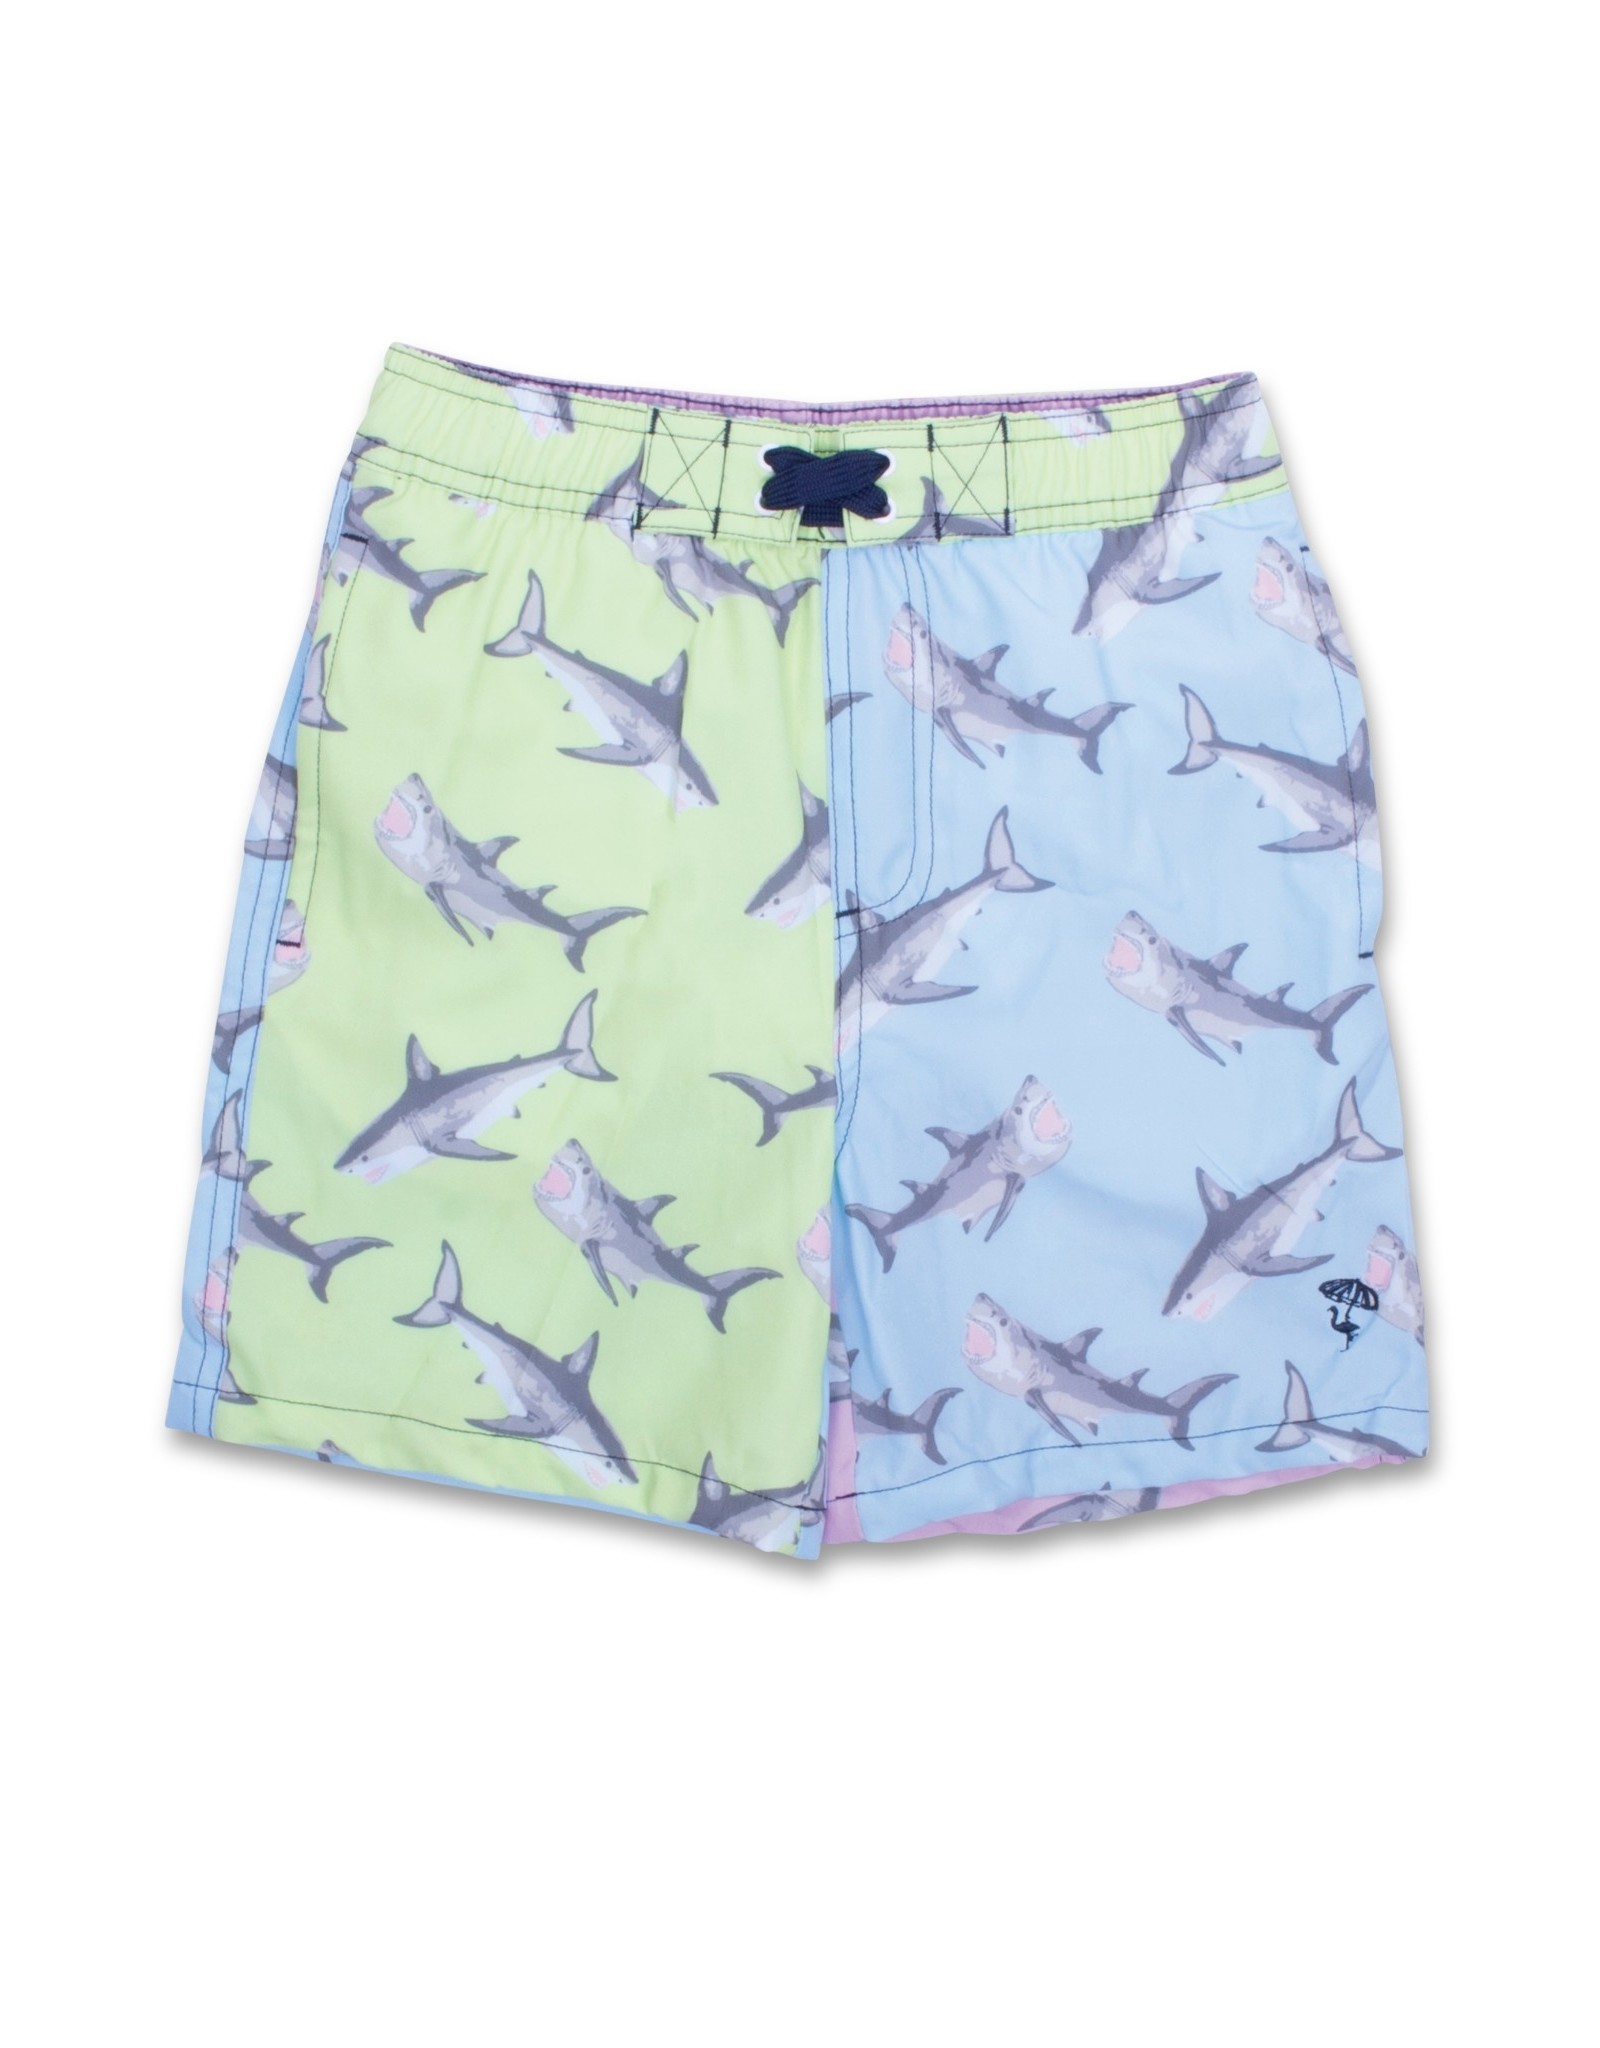 shade critters SC Boys Water Appearing Swim Trunks